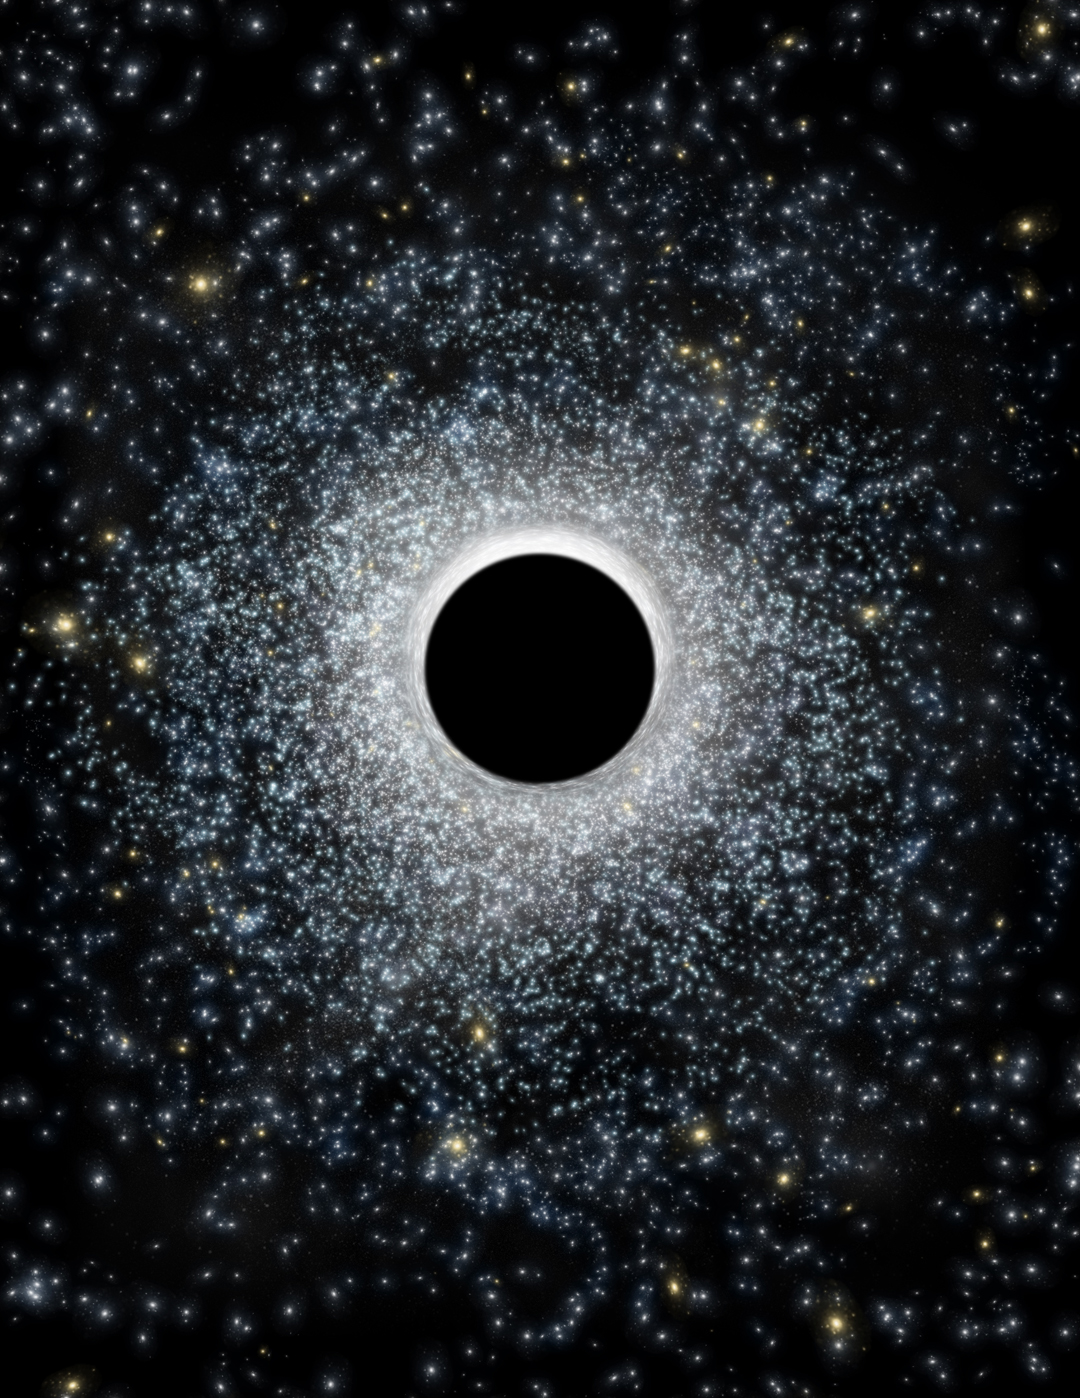 In this artist&#039;s illustration, an intermediate-mass black hole in the foreground distorts light from the globular star cluster in the background. New research suggests that a 2,200 solar-mass black hole resides at the center of the globular cluster 47 Tucanae.